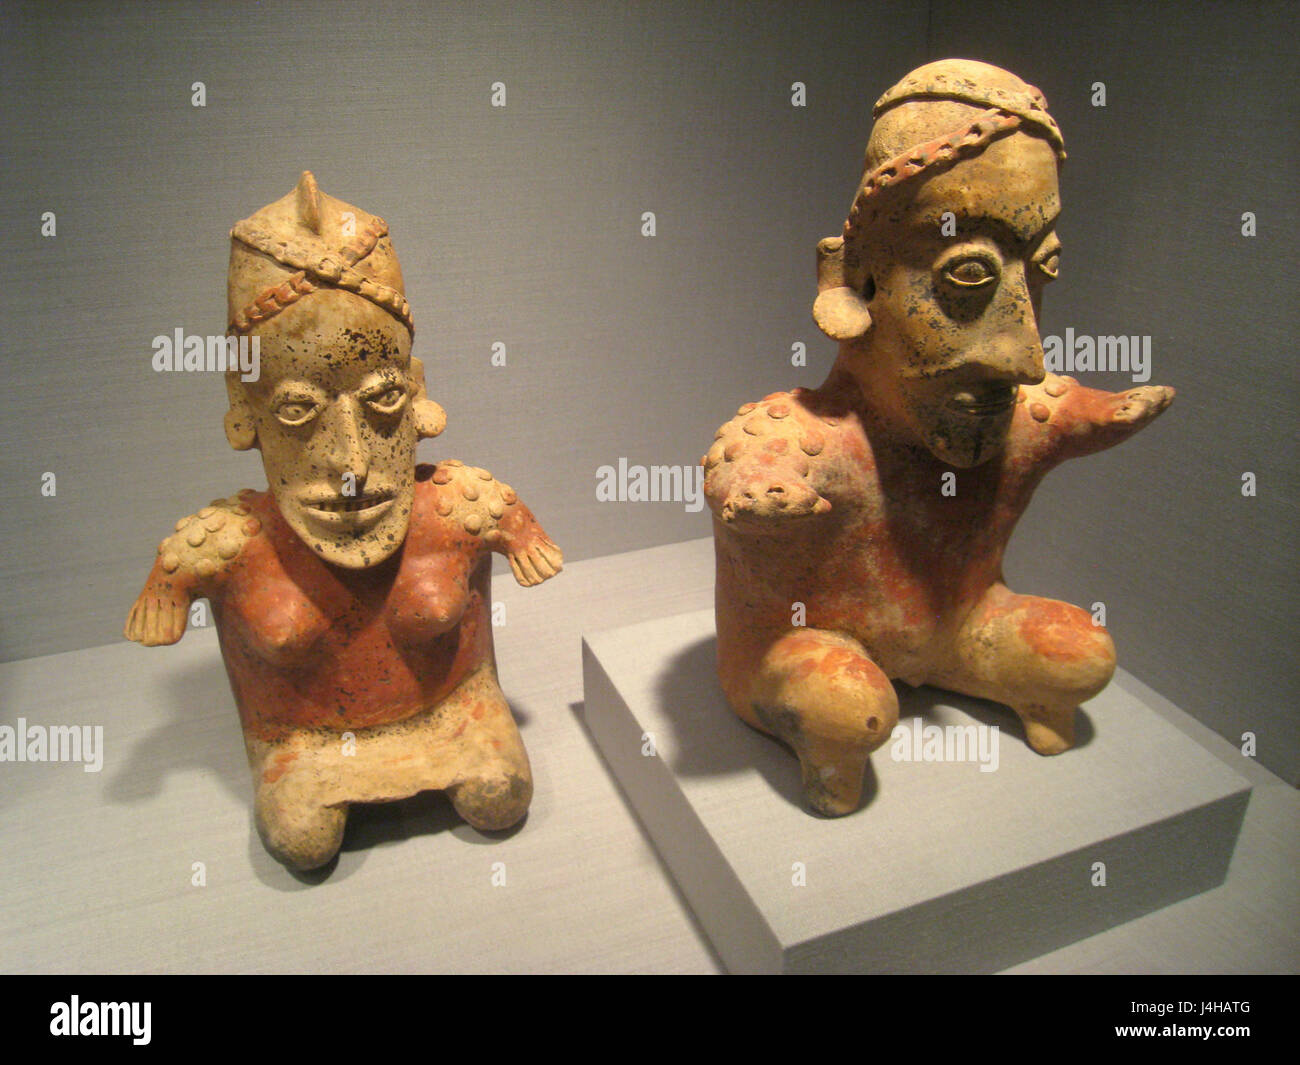 Seated Female and Male Figures, Mexico, State of Jalisco, 200 BC   500 AD, ceramic, Pre Columbian collection, Worcester Art Museum   IMG 7648 Stock Photo